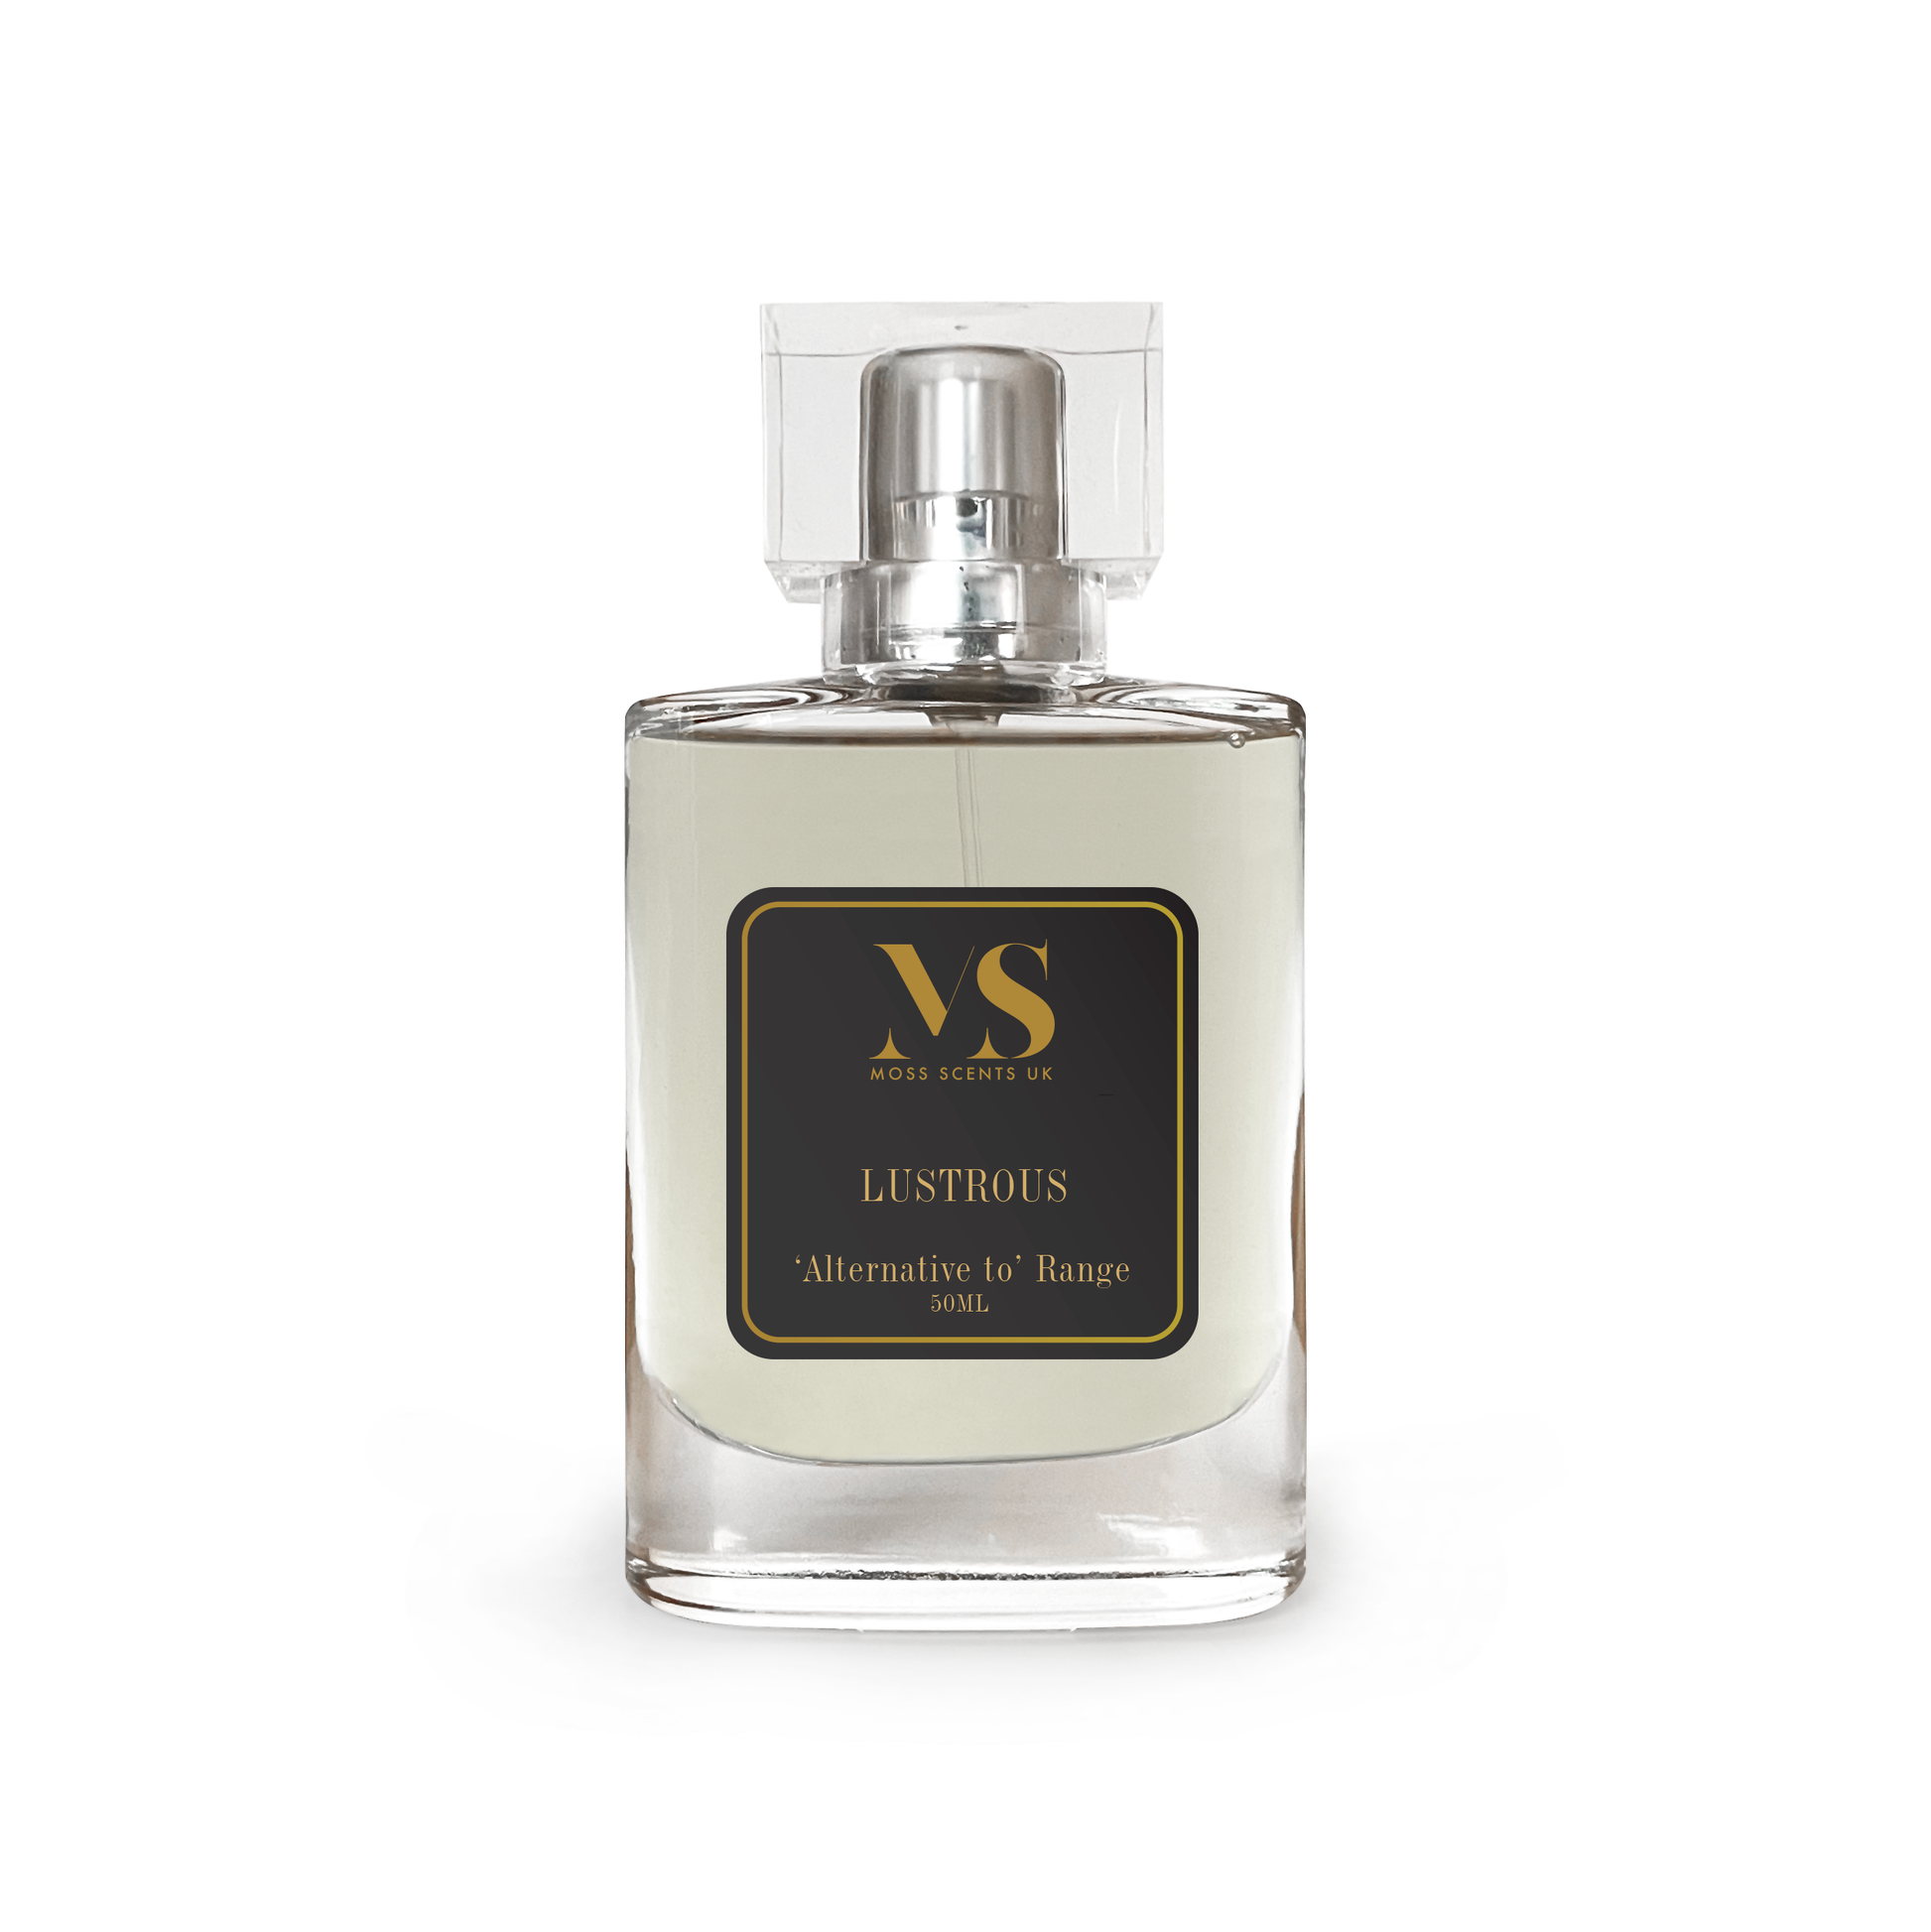 Oud Satin Mood Inspired - Lustrous Moss Scents UK